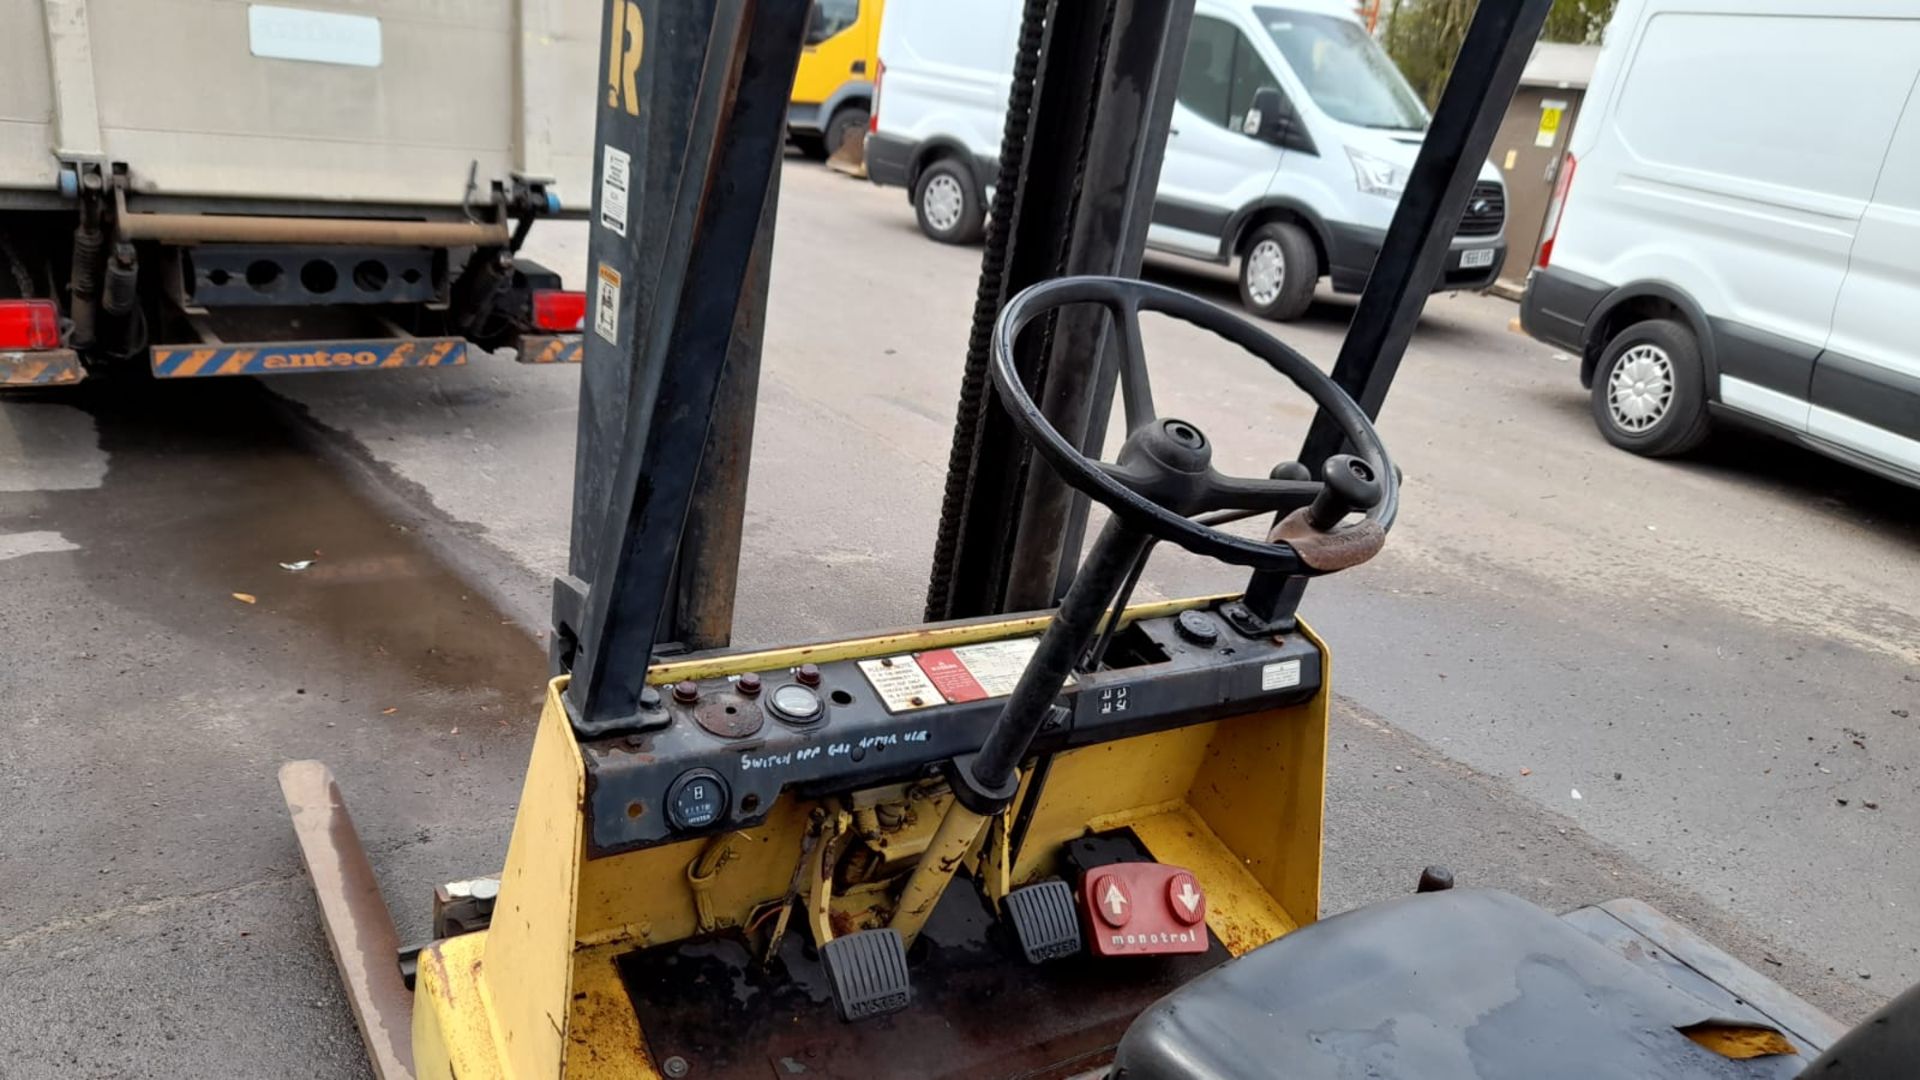 1989 HYSTER S2.00XL 2 TON GAS POWERED FORKLIFT, RUNS DRIVES AND LIFTS *PLUS VAT* - Image 4 of 5